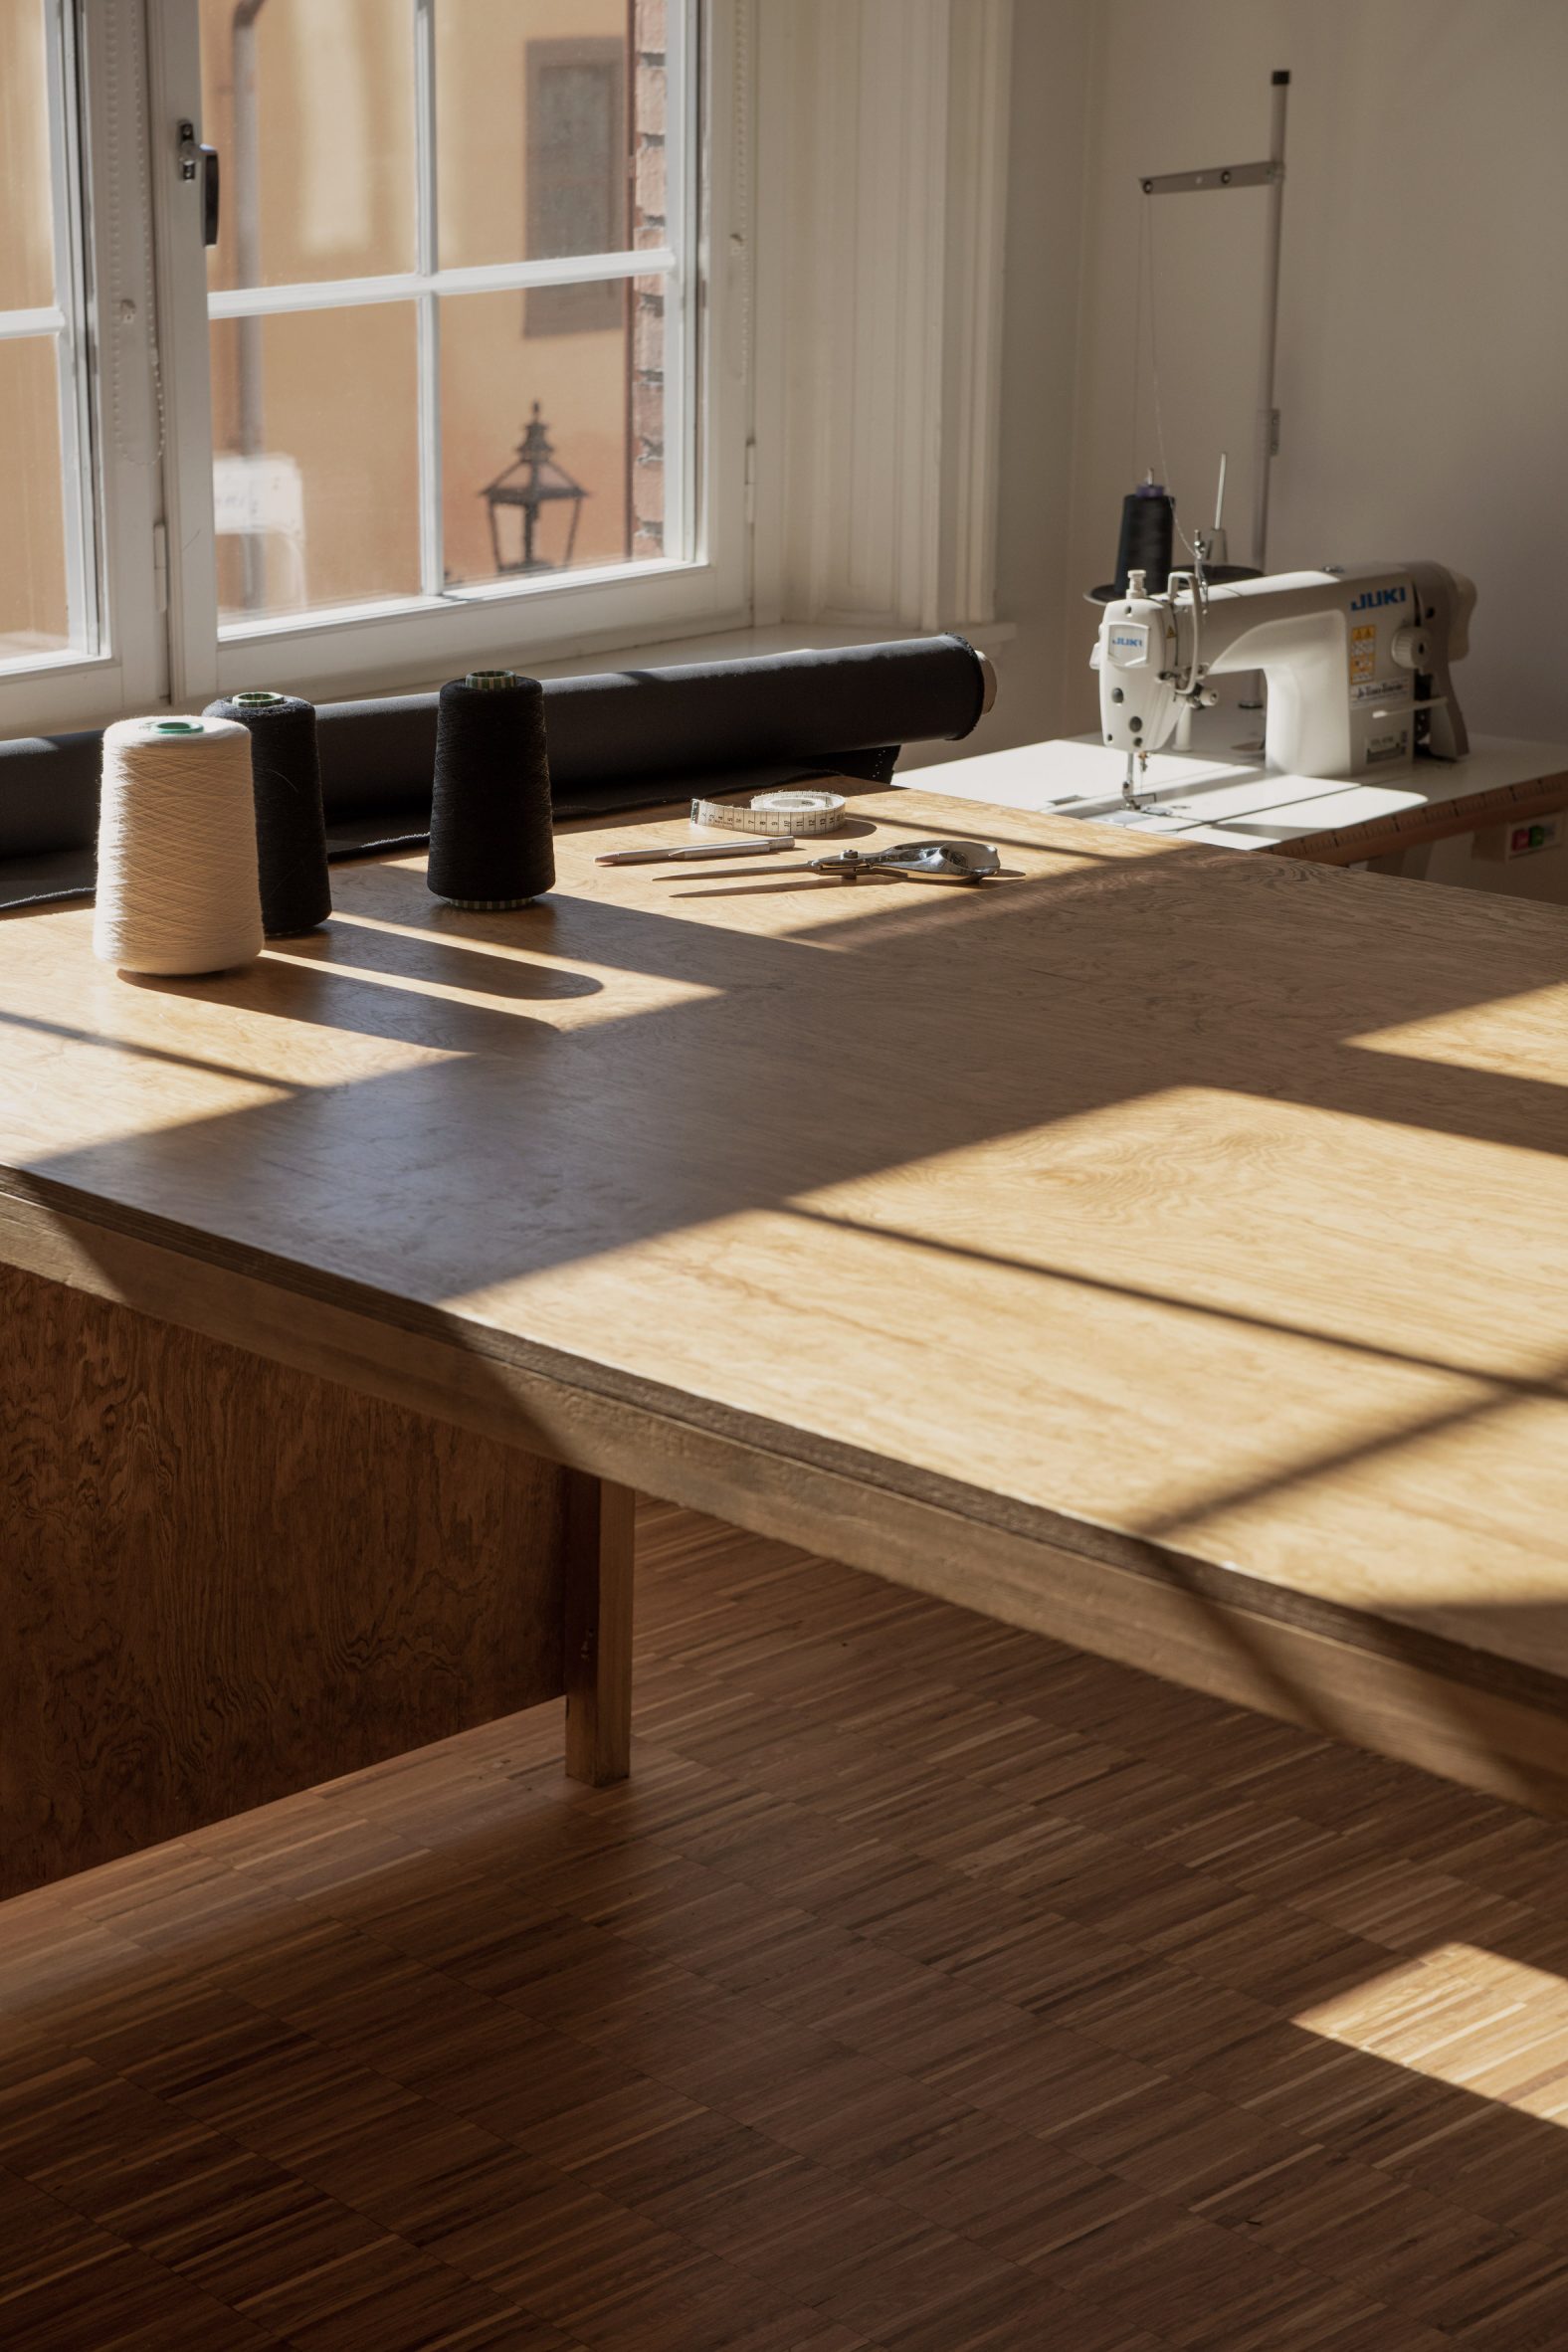 A wooden meeting table in an office